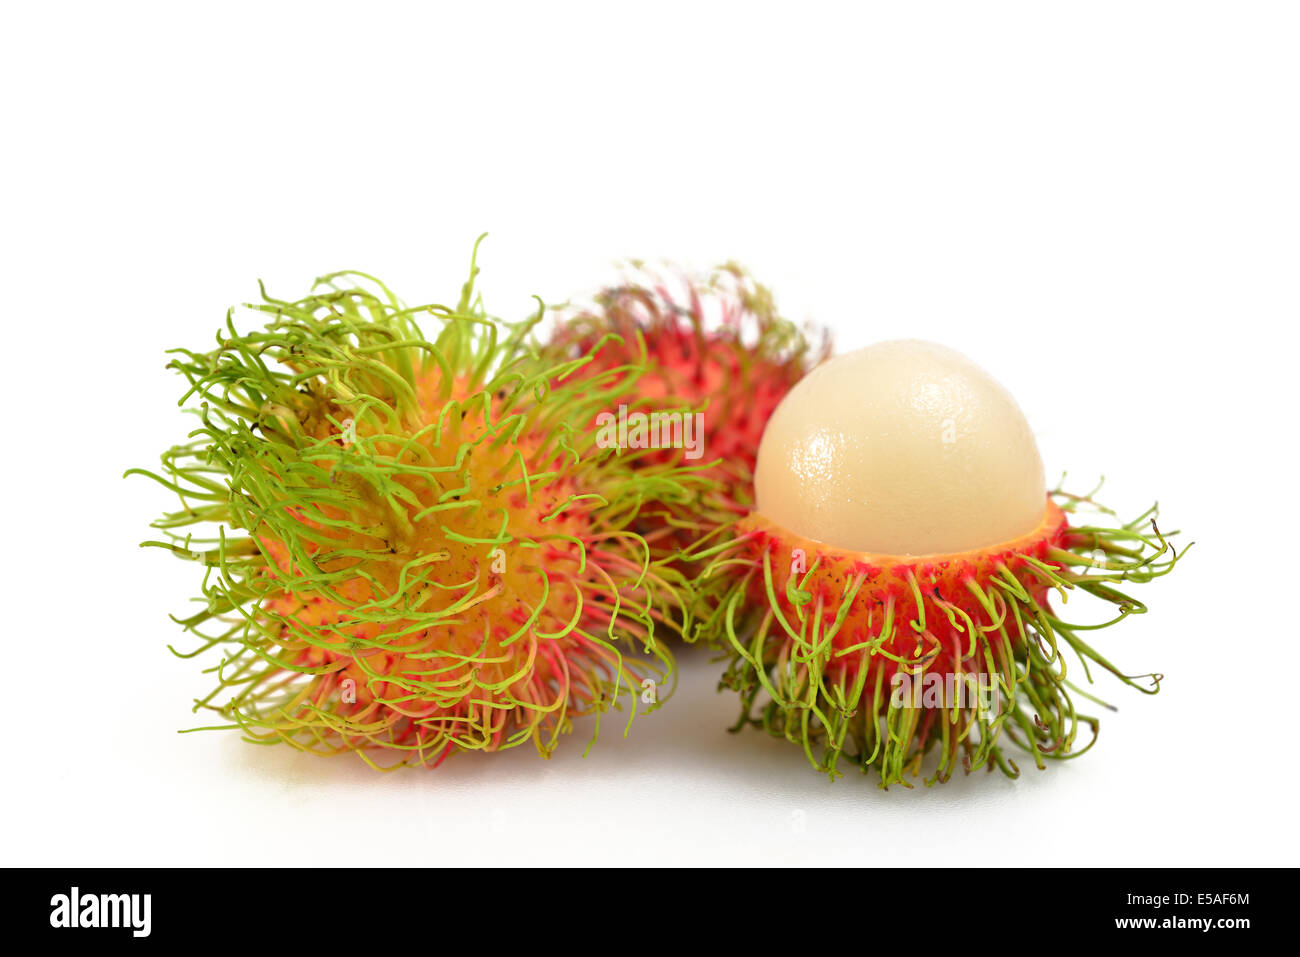 Rambutan fruit isolated on white Banque D'Images